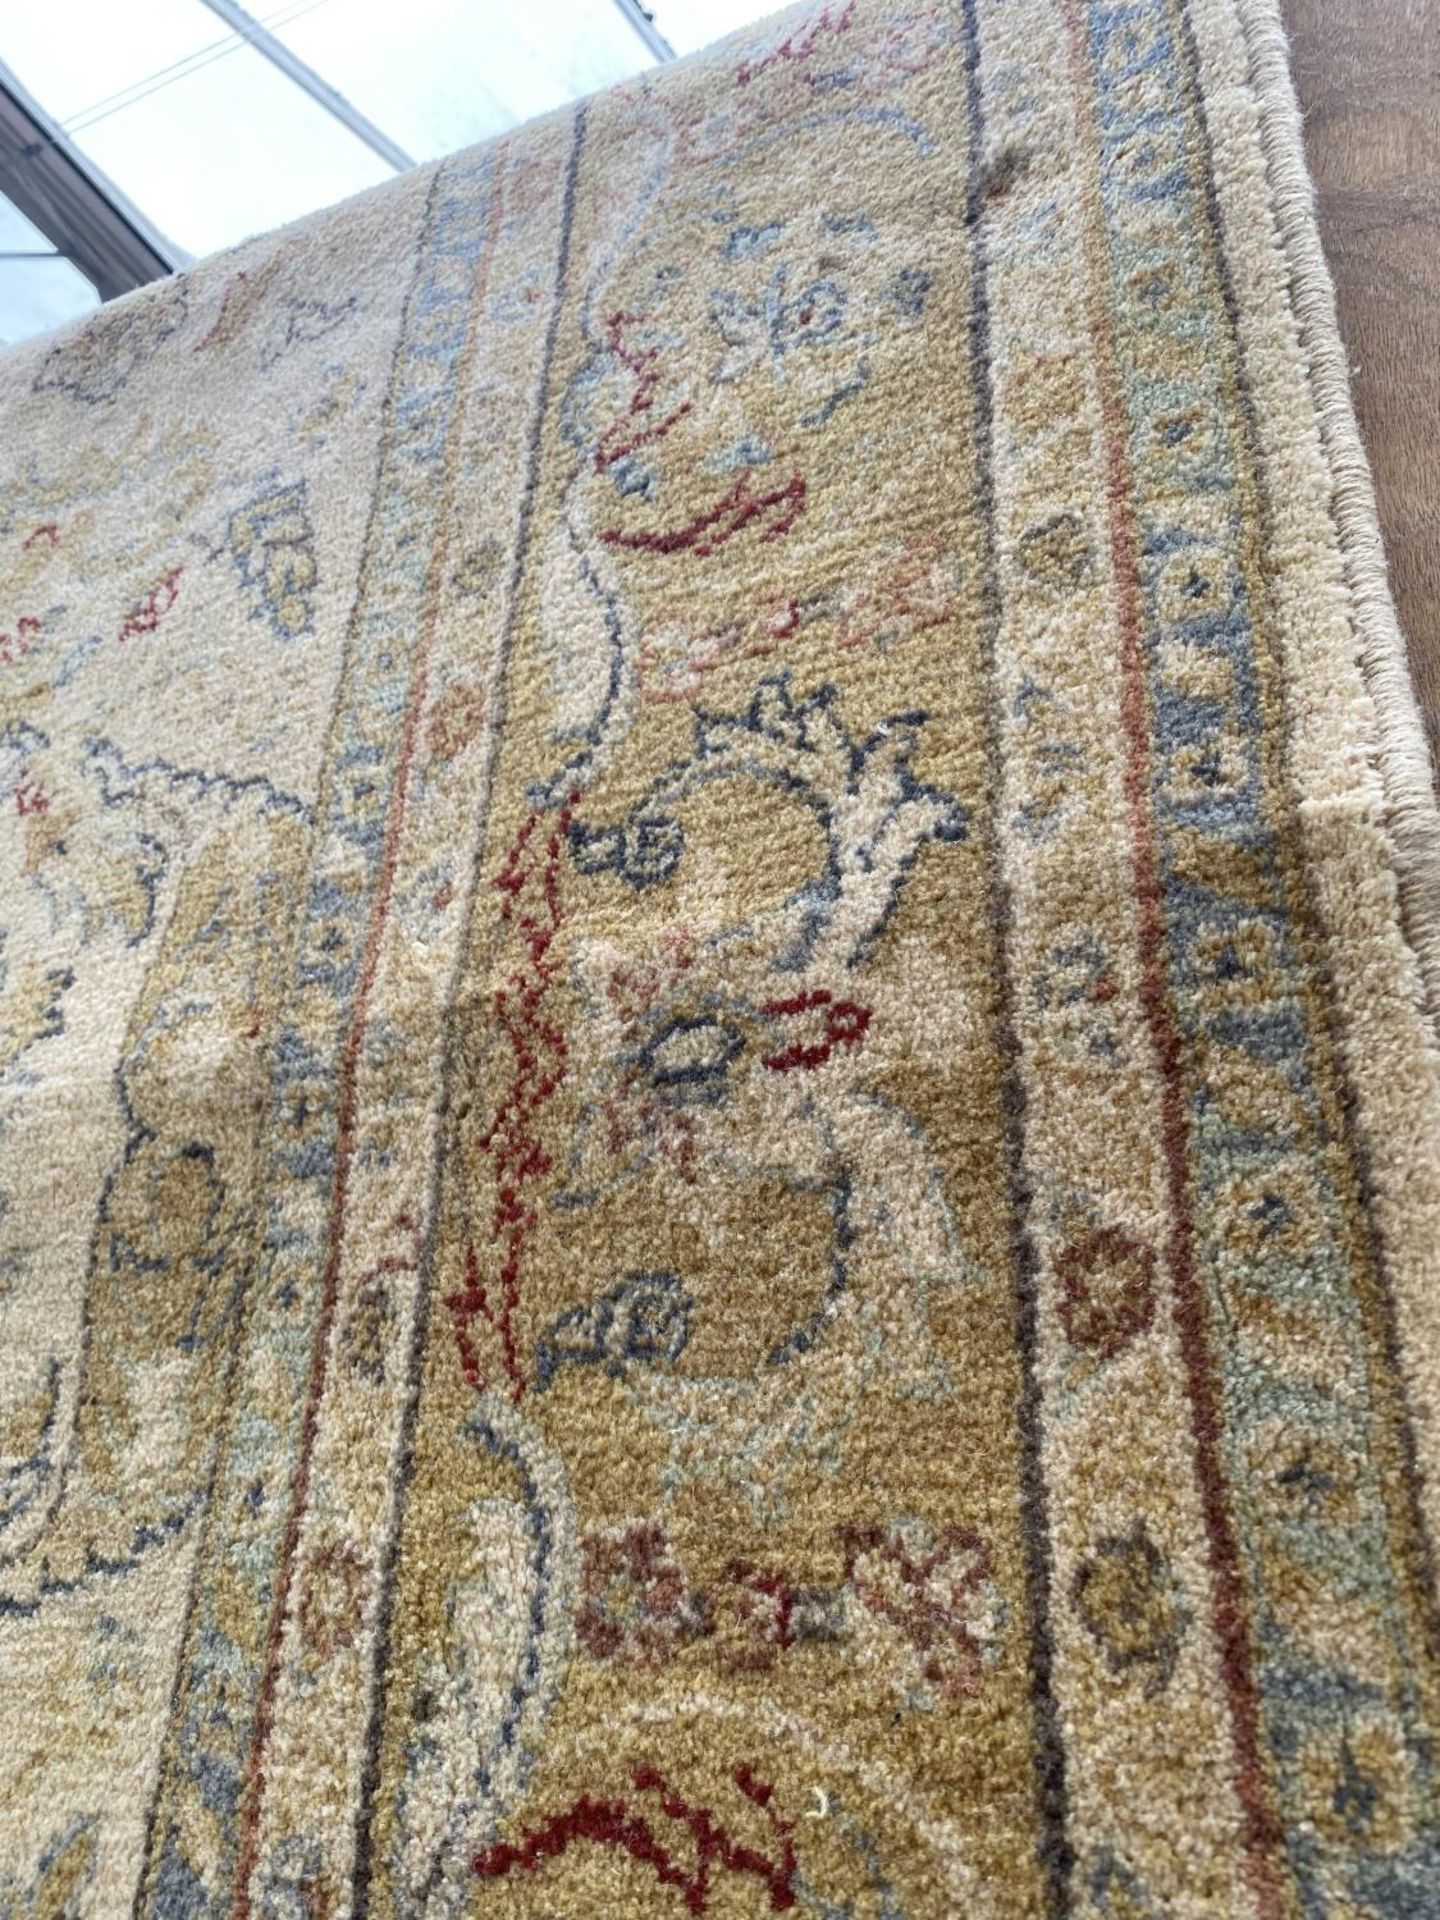 A LARGE CREAM PATTERNED RUG - Image 3 of 3